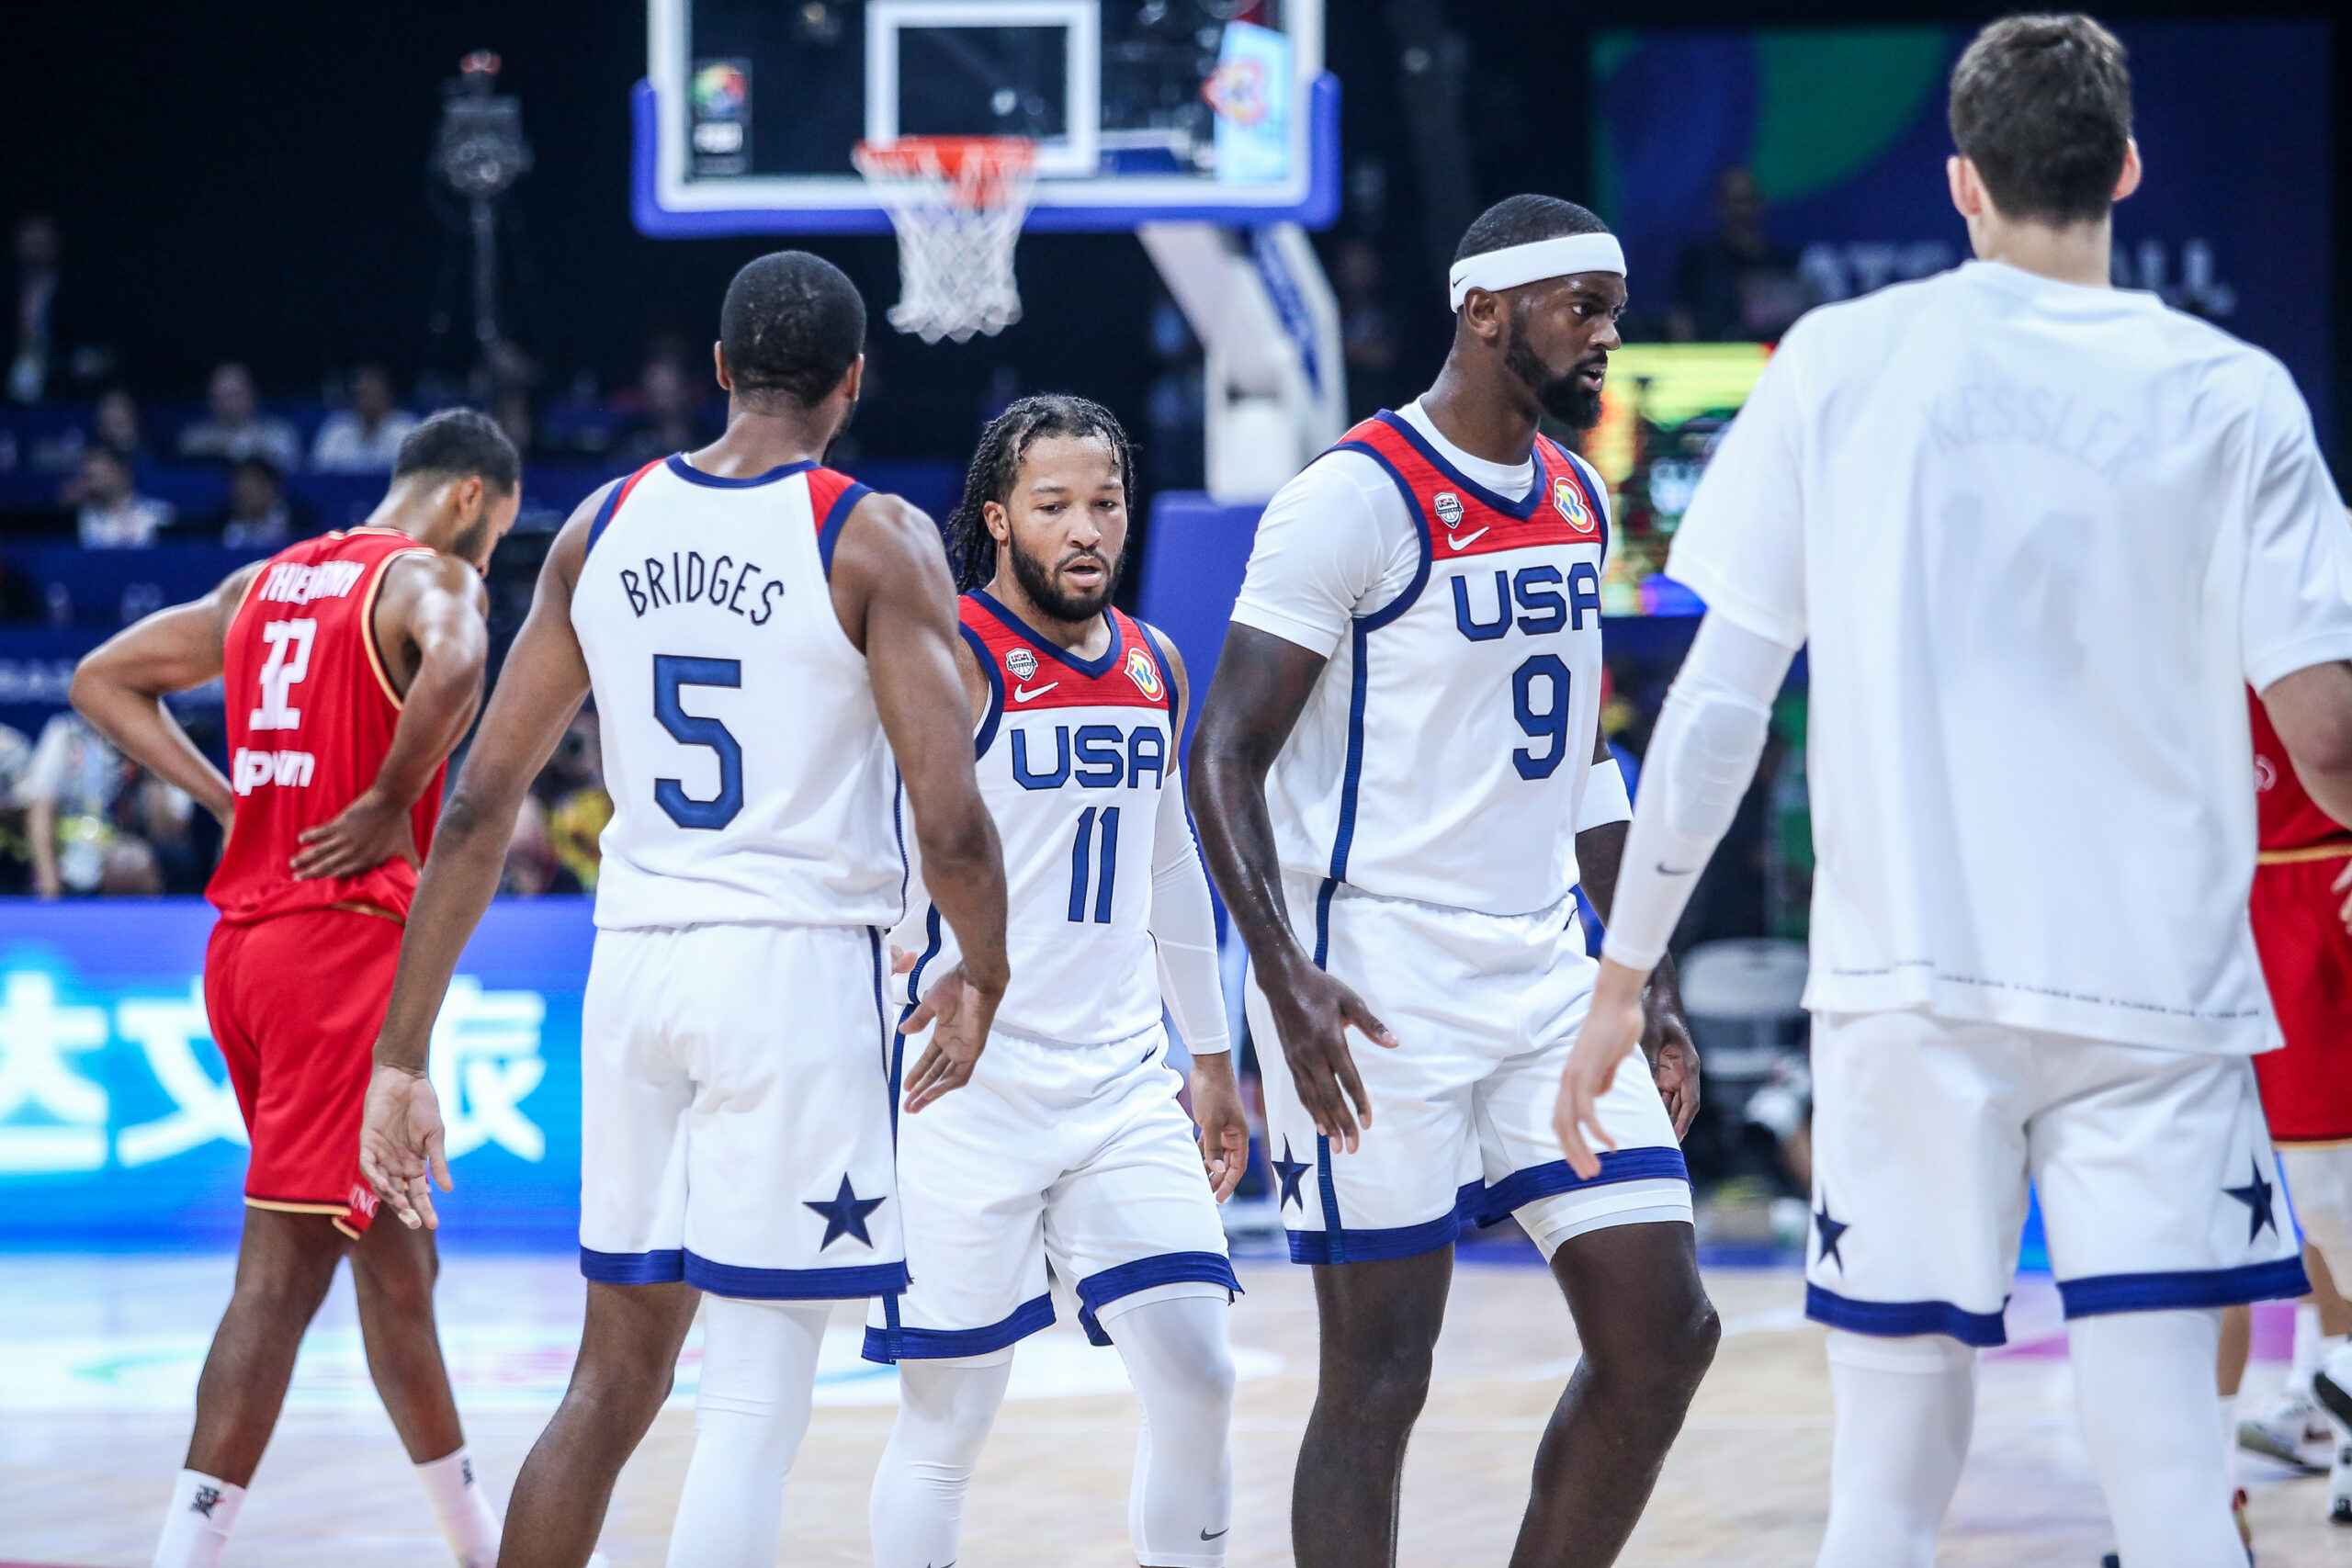 Team USA in the Fiba World Cup semifinals game against Germany.